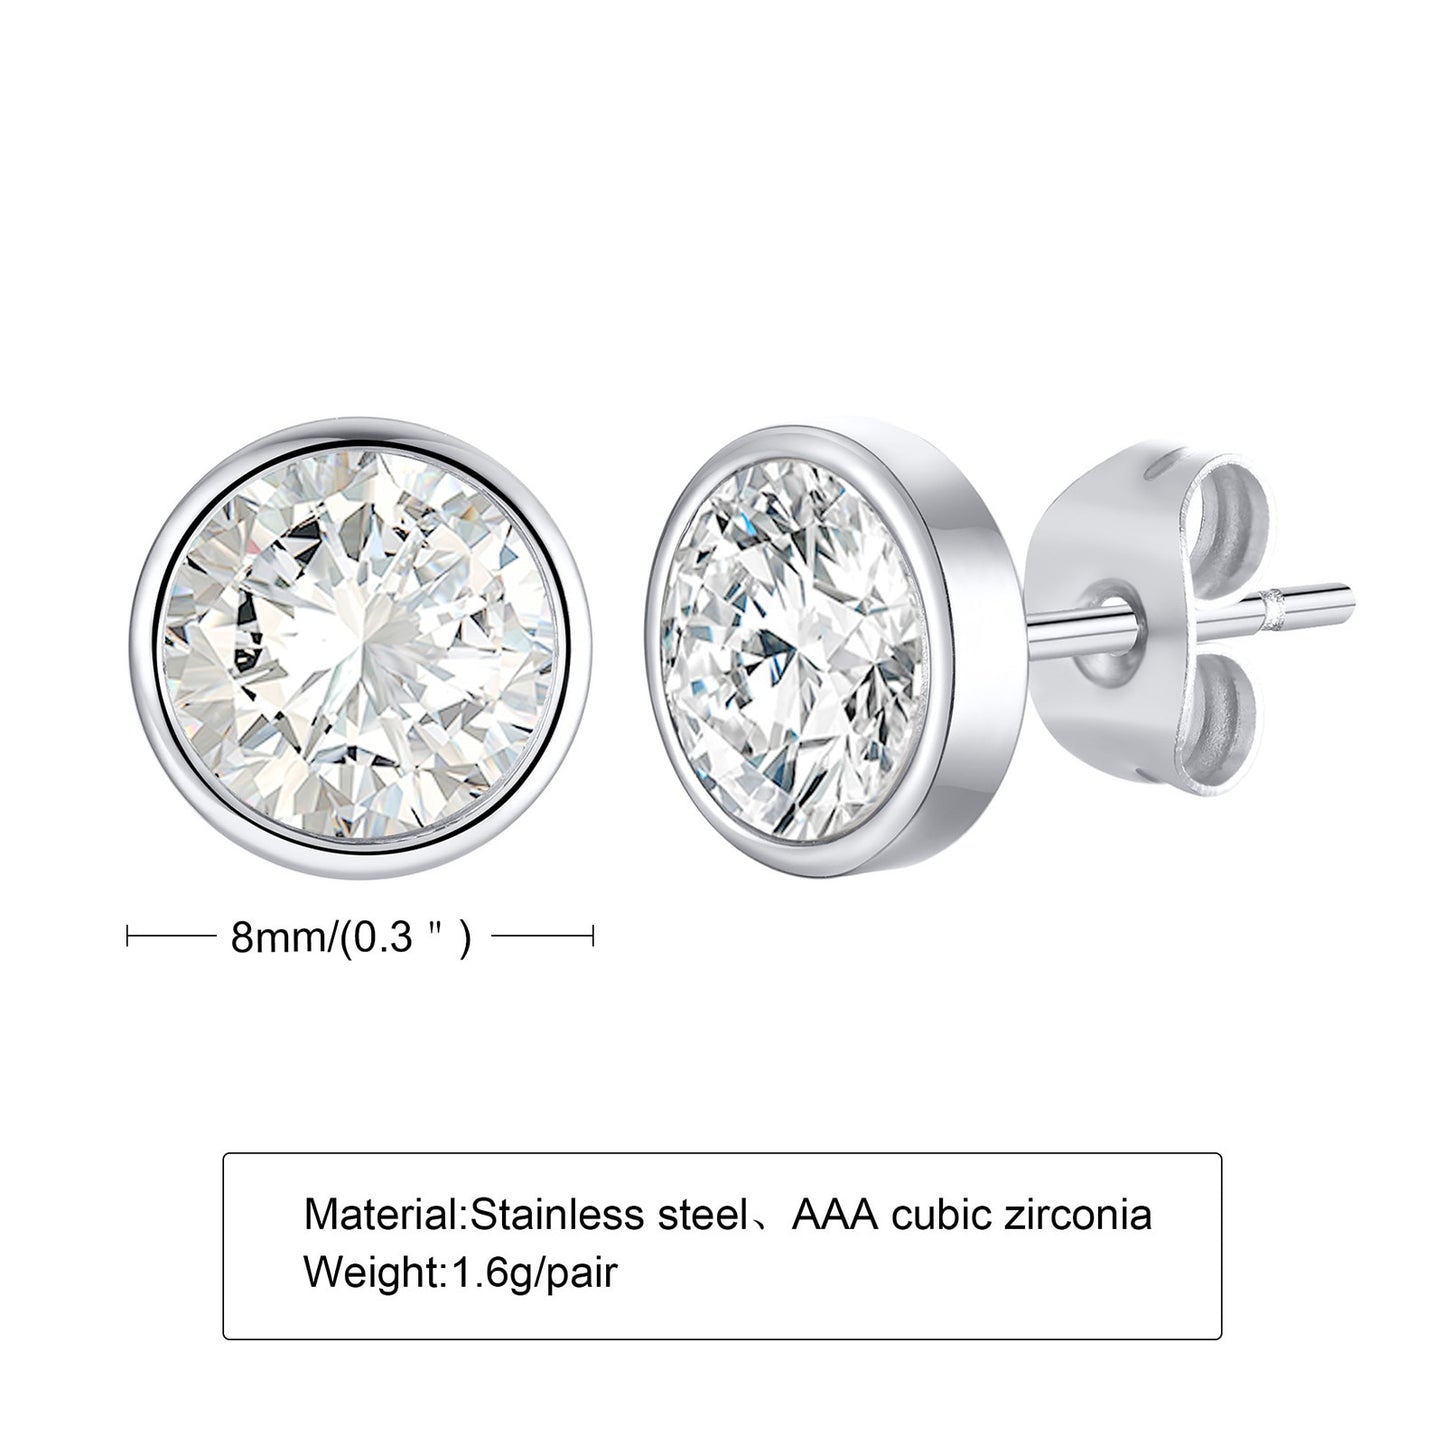 Aretes para mujeres y hombres Simple Basic Earrings for Women Men, AAA CZ Stone Bling Stud Earrings, Never Fade Metal Ear Jewelry